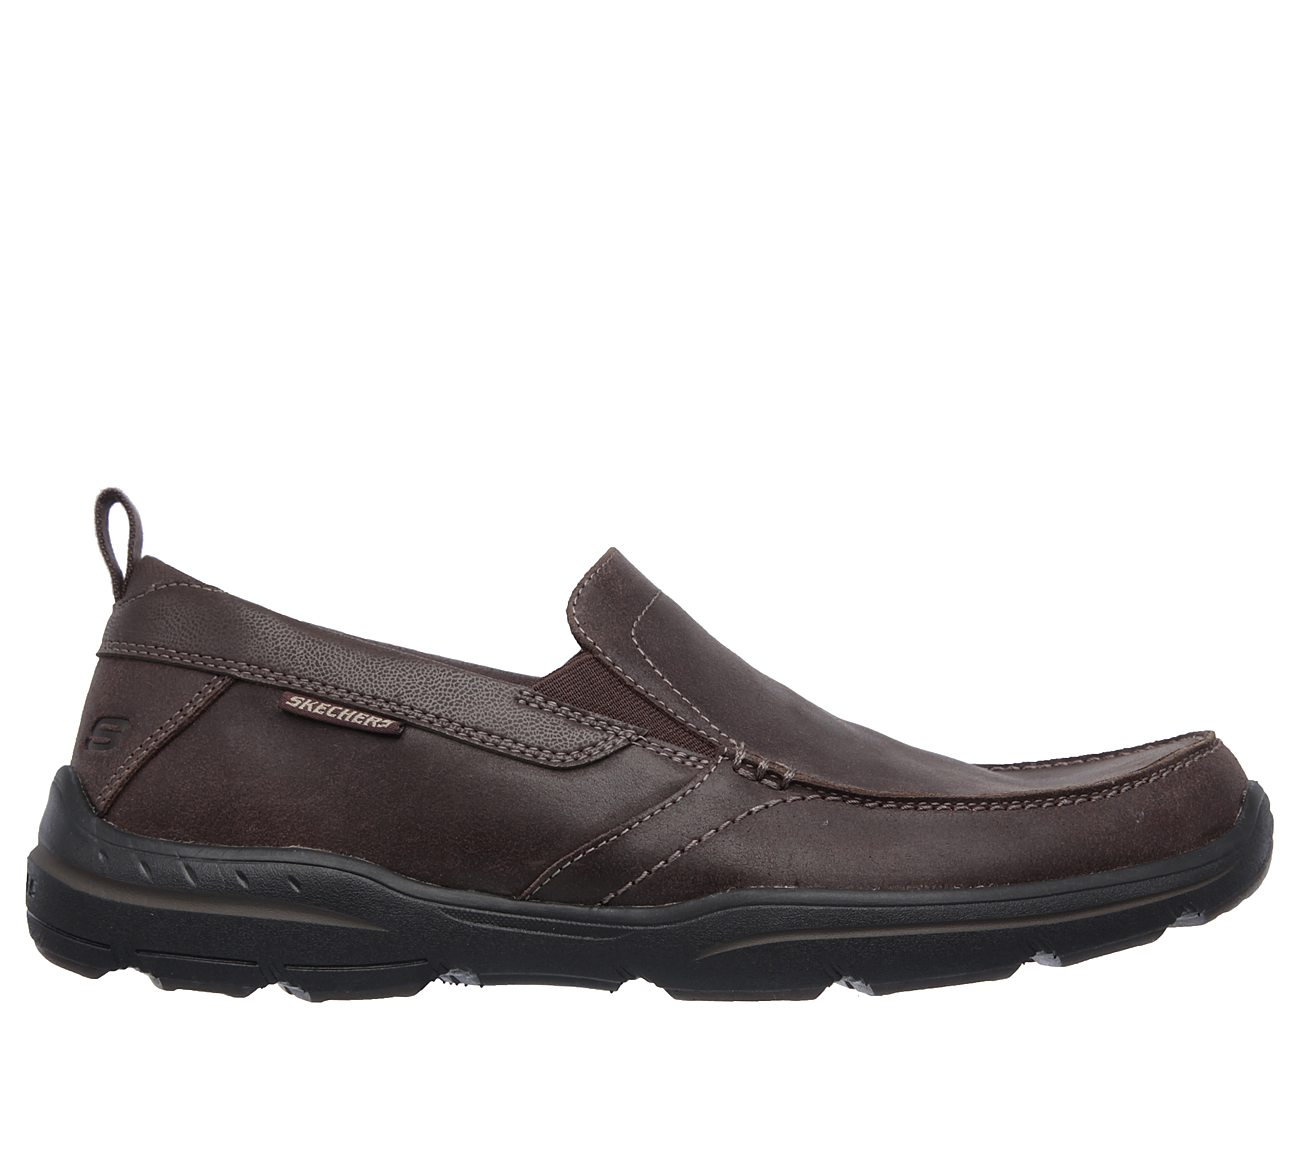 skechers leather shoes mens india off 